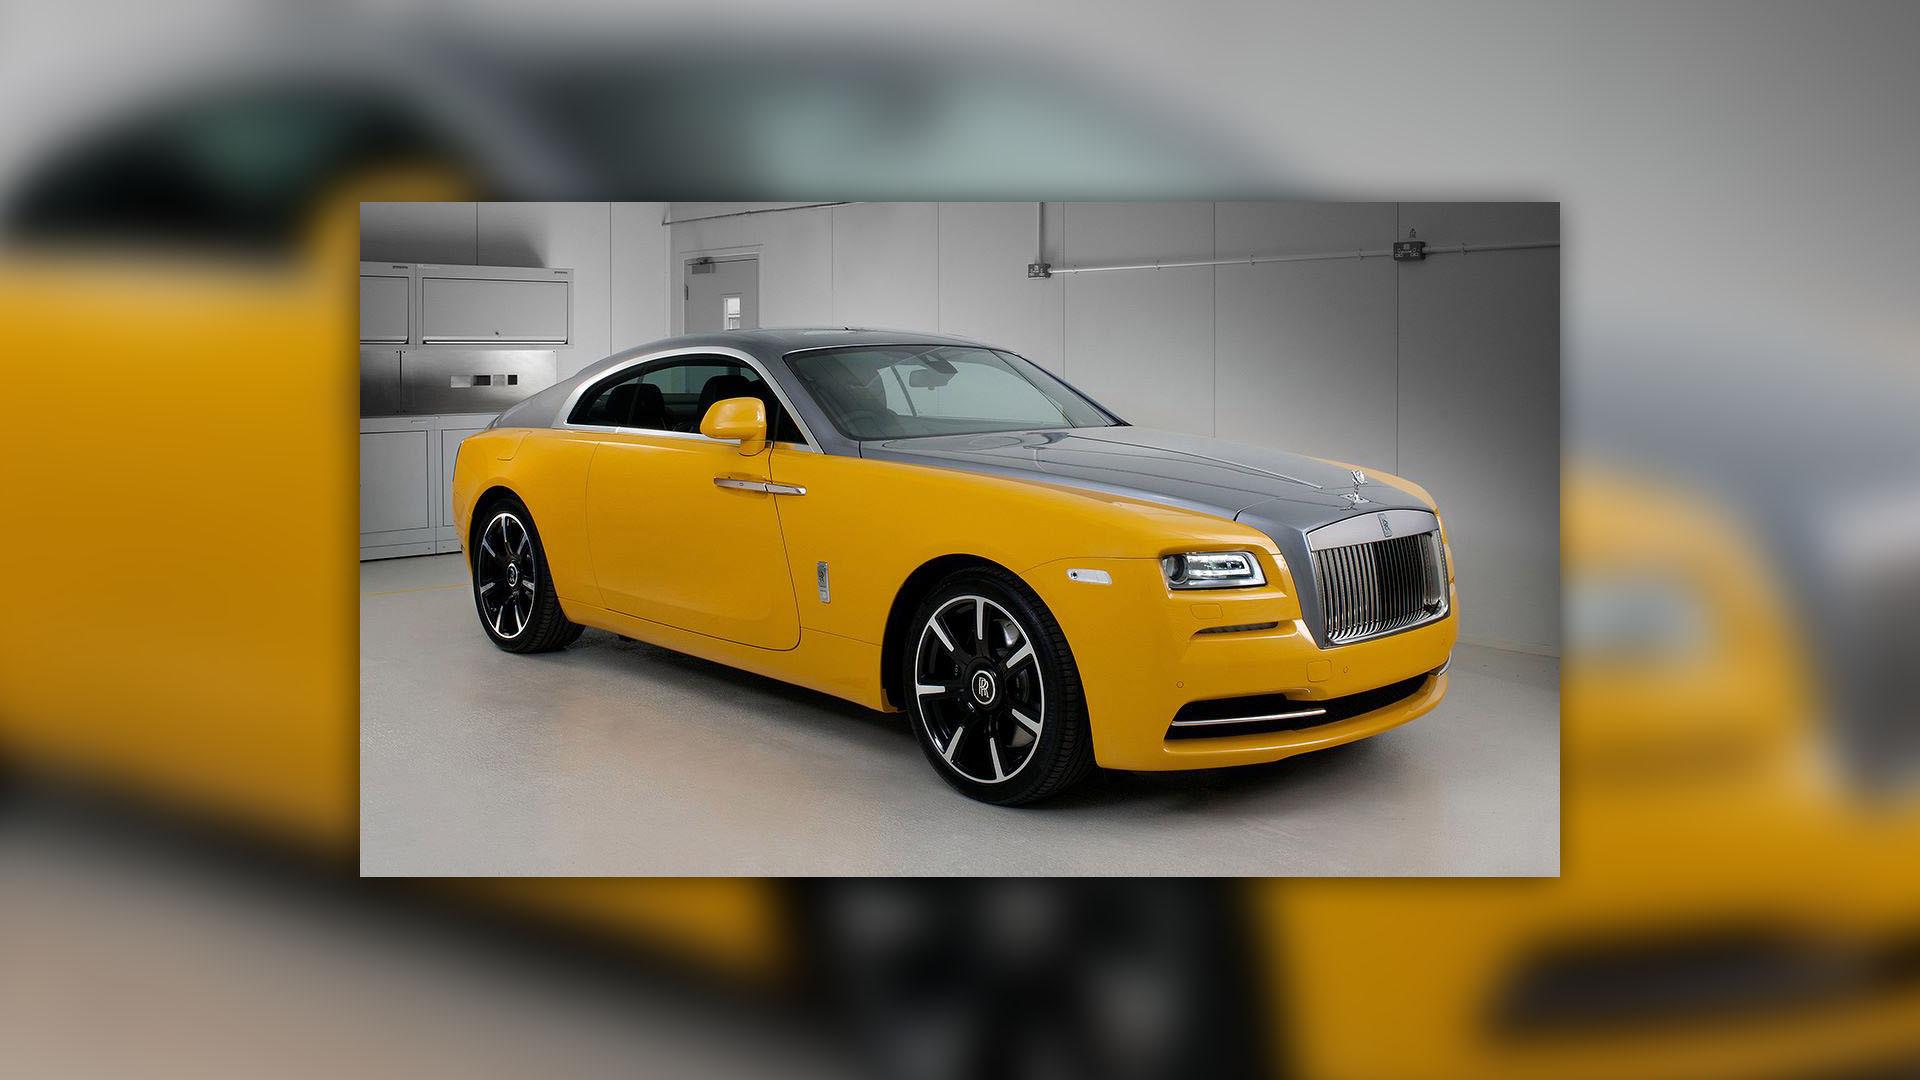 Rolls Royce Wraith In Golden Yellow Is Another Bespoke Creation